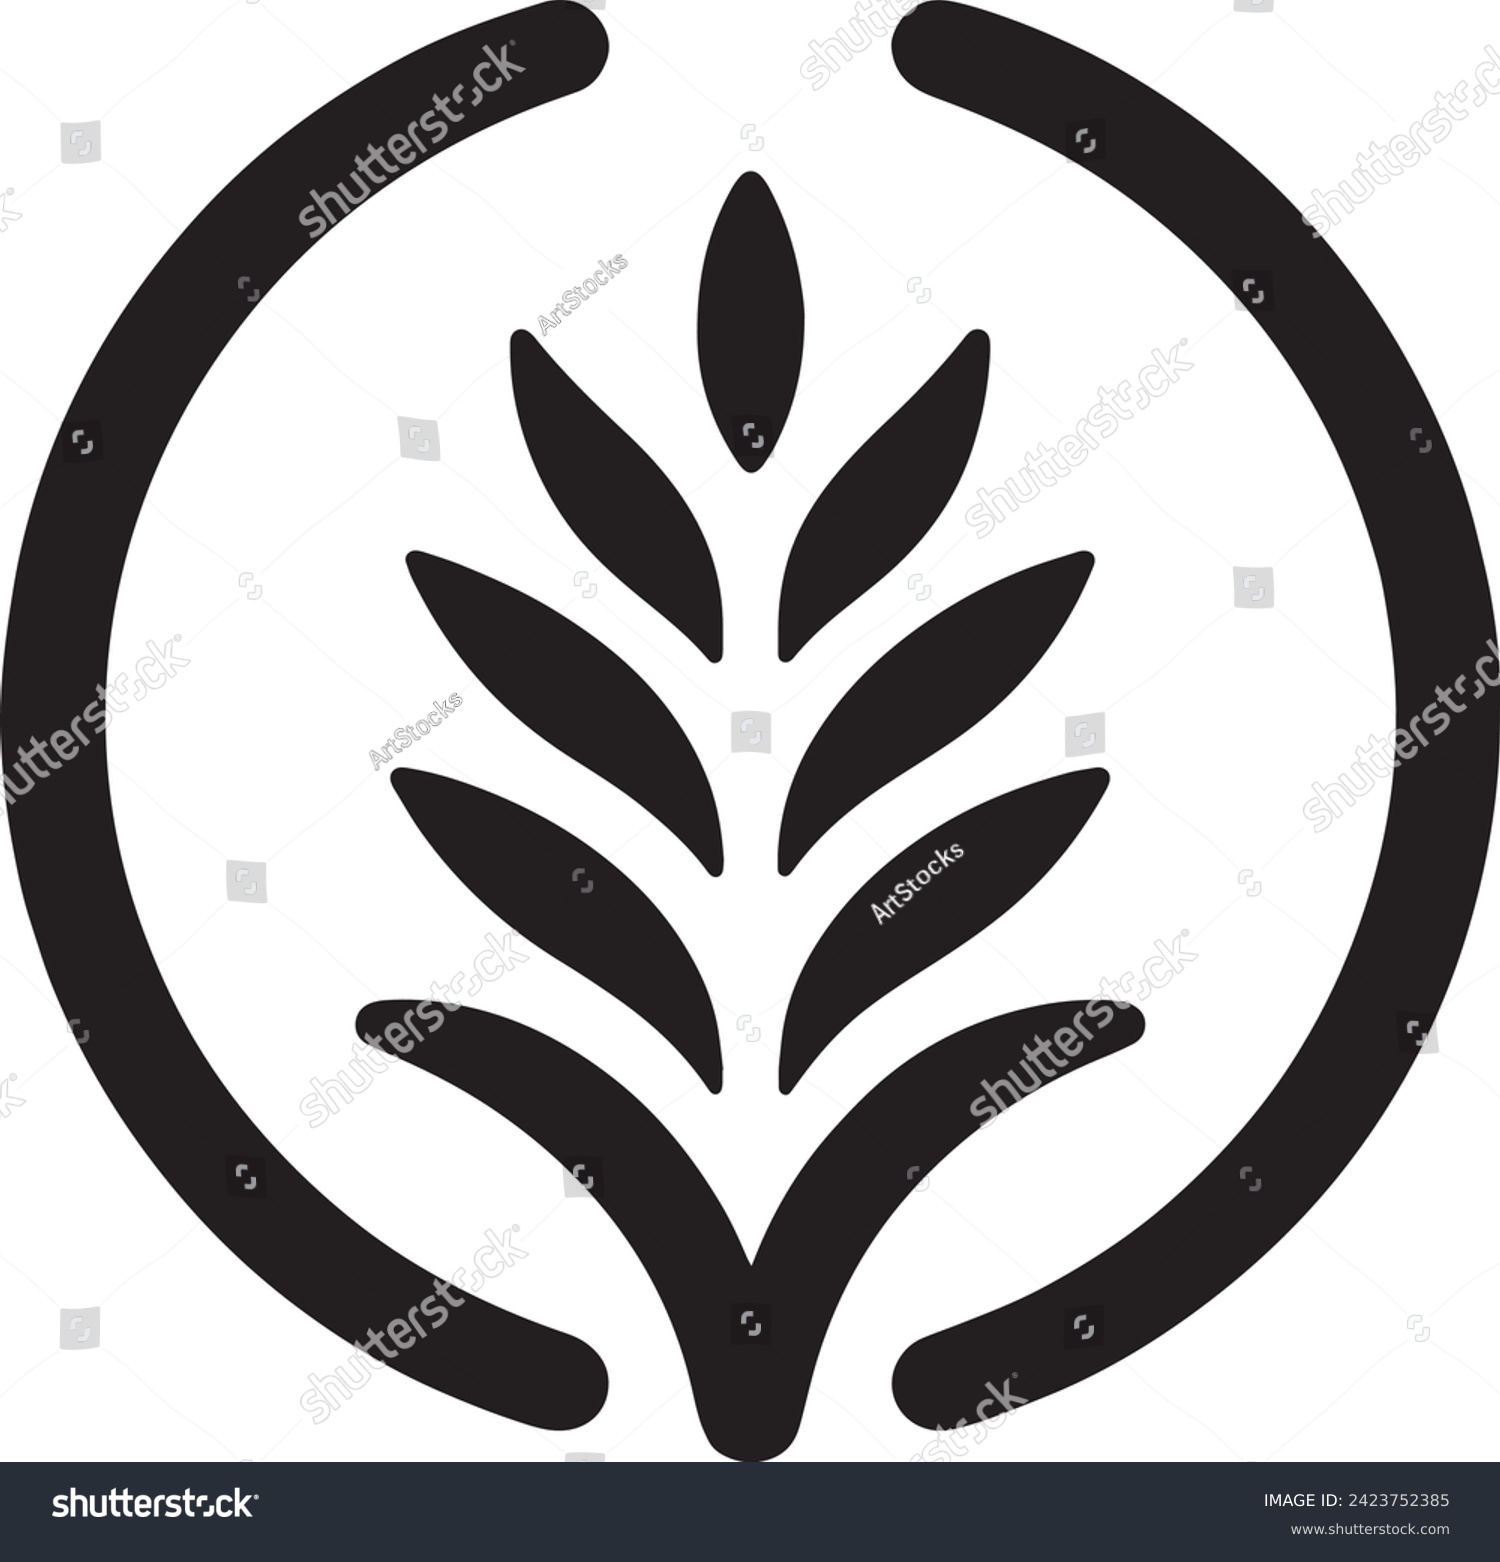 SVG of The symmetrical layout within a circular frame suggests growth, nature, and agriculture. svg